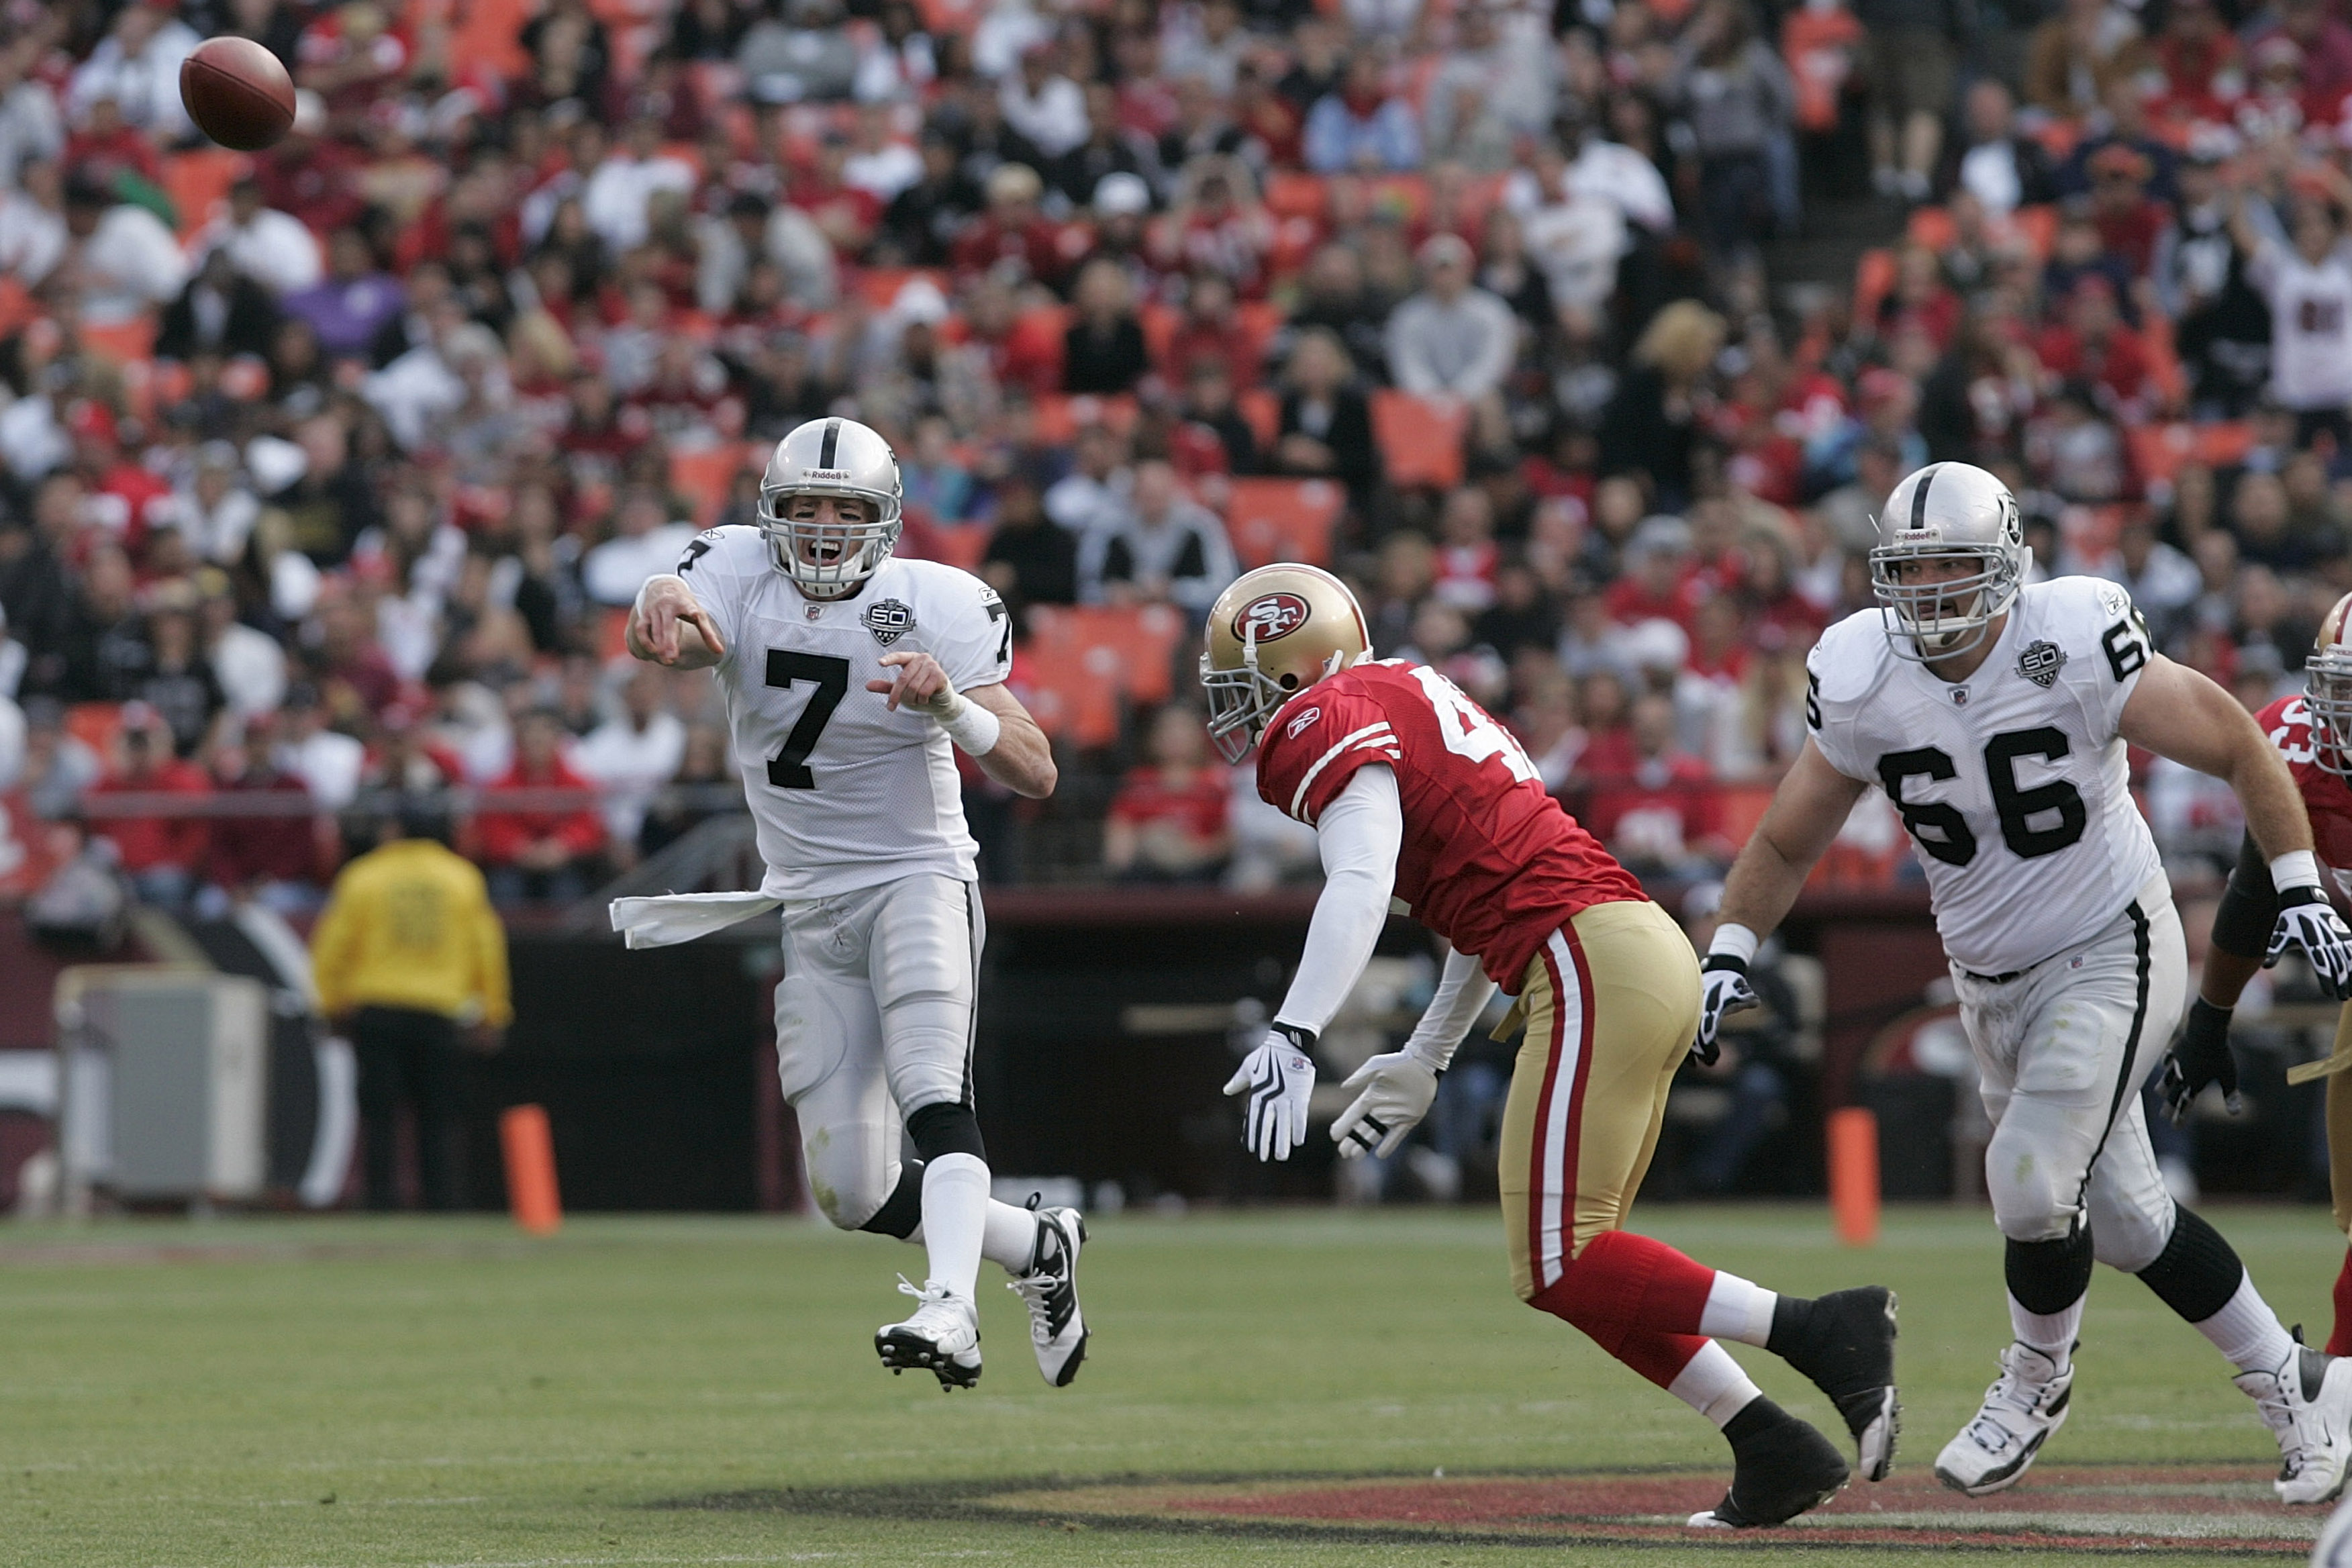 SAN FRANCISCO - AUGUST 22:  Oakland Raiders quarterback Jeff Garcia #7 gets rid of the ball as he is pressured by San Francisco 49ers linebacker Diyral Briggs #47 as Oakland Raiders guard Cooper Carlisle #66 looks on during the 2nd quarter as the San Fran